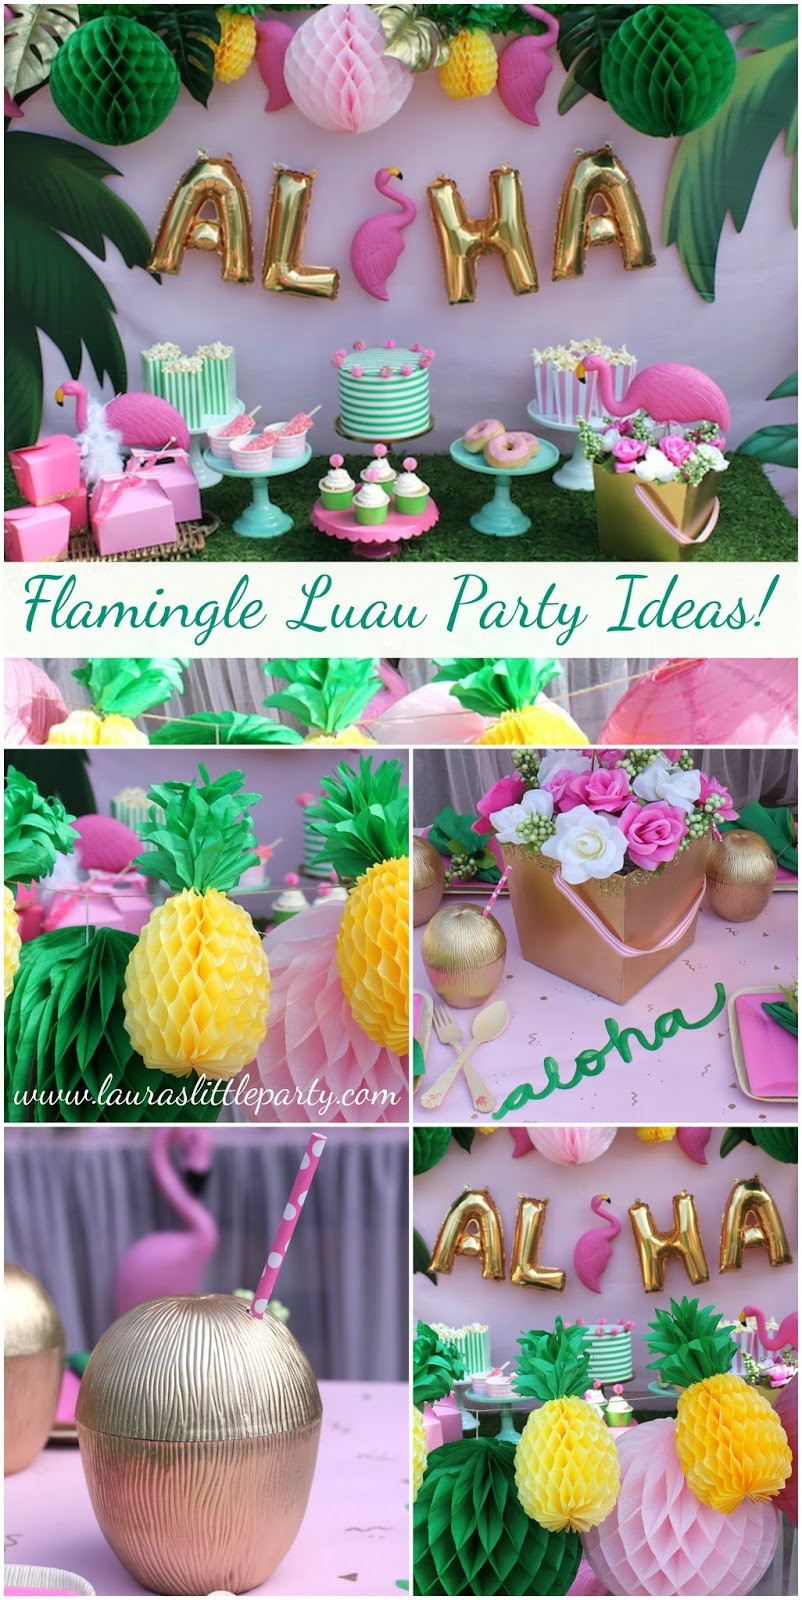 Decorating Ideas For A Summer Party
 Let s Flamingle Luau Summer Party Ideas LAURA S little